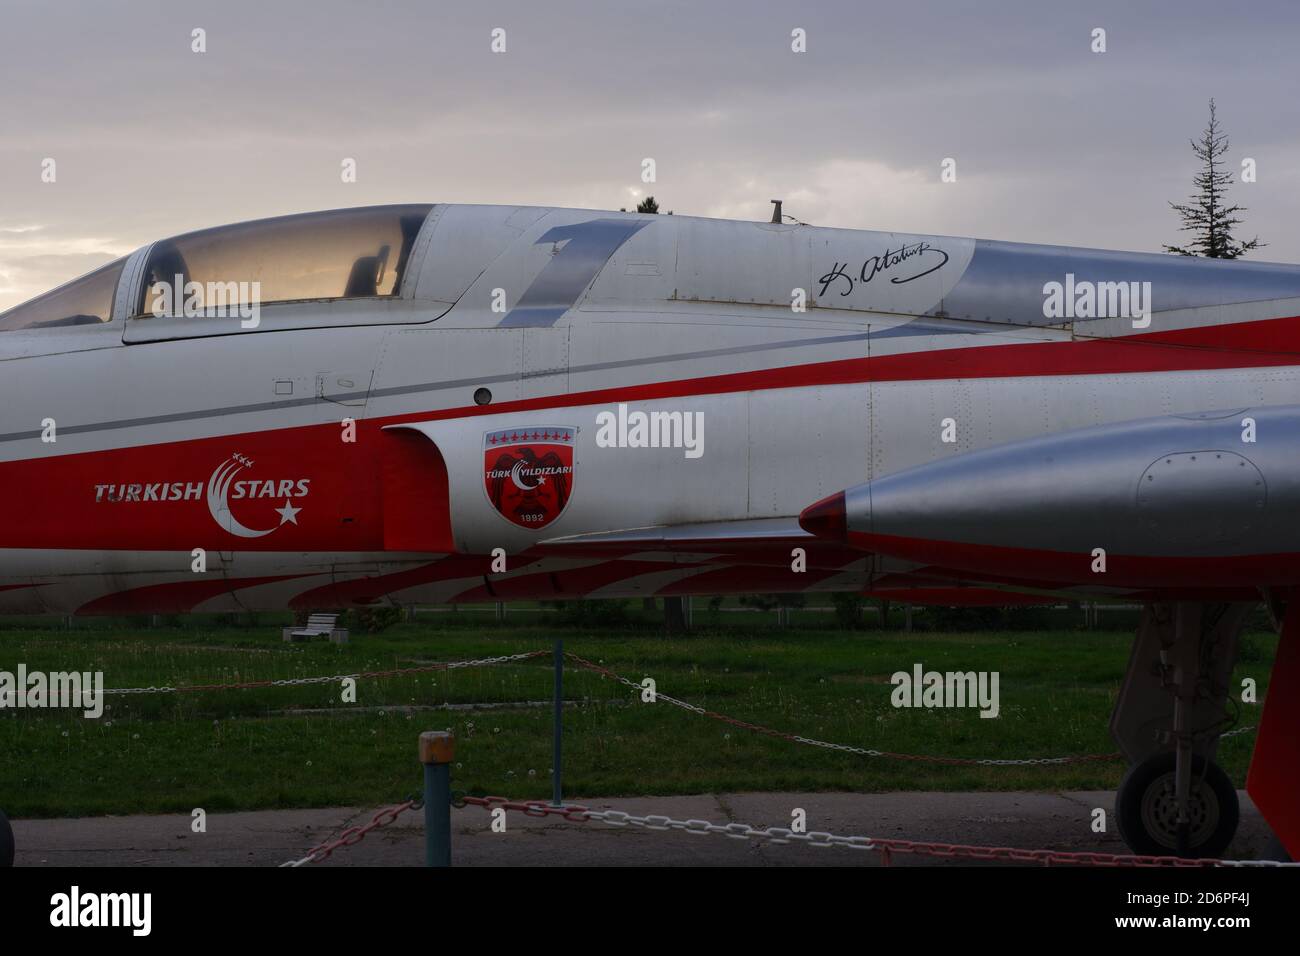 Plane of Turkish Air Force Air Acrobacy Team Stock Photo